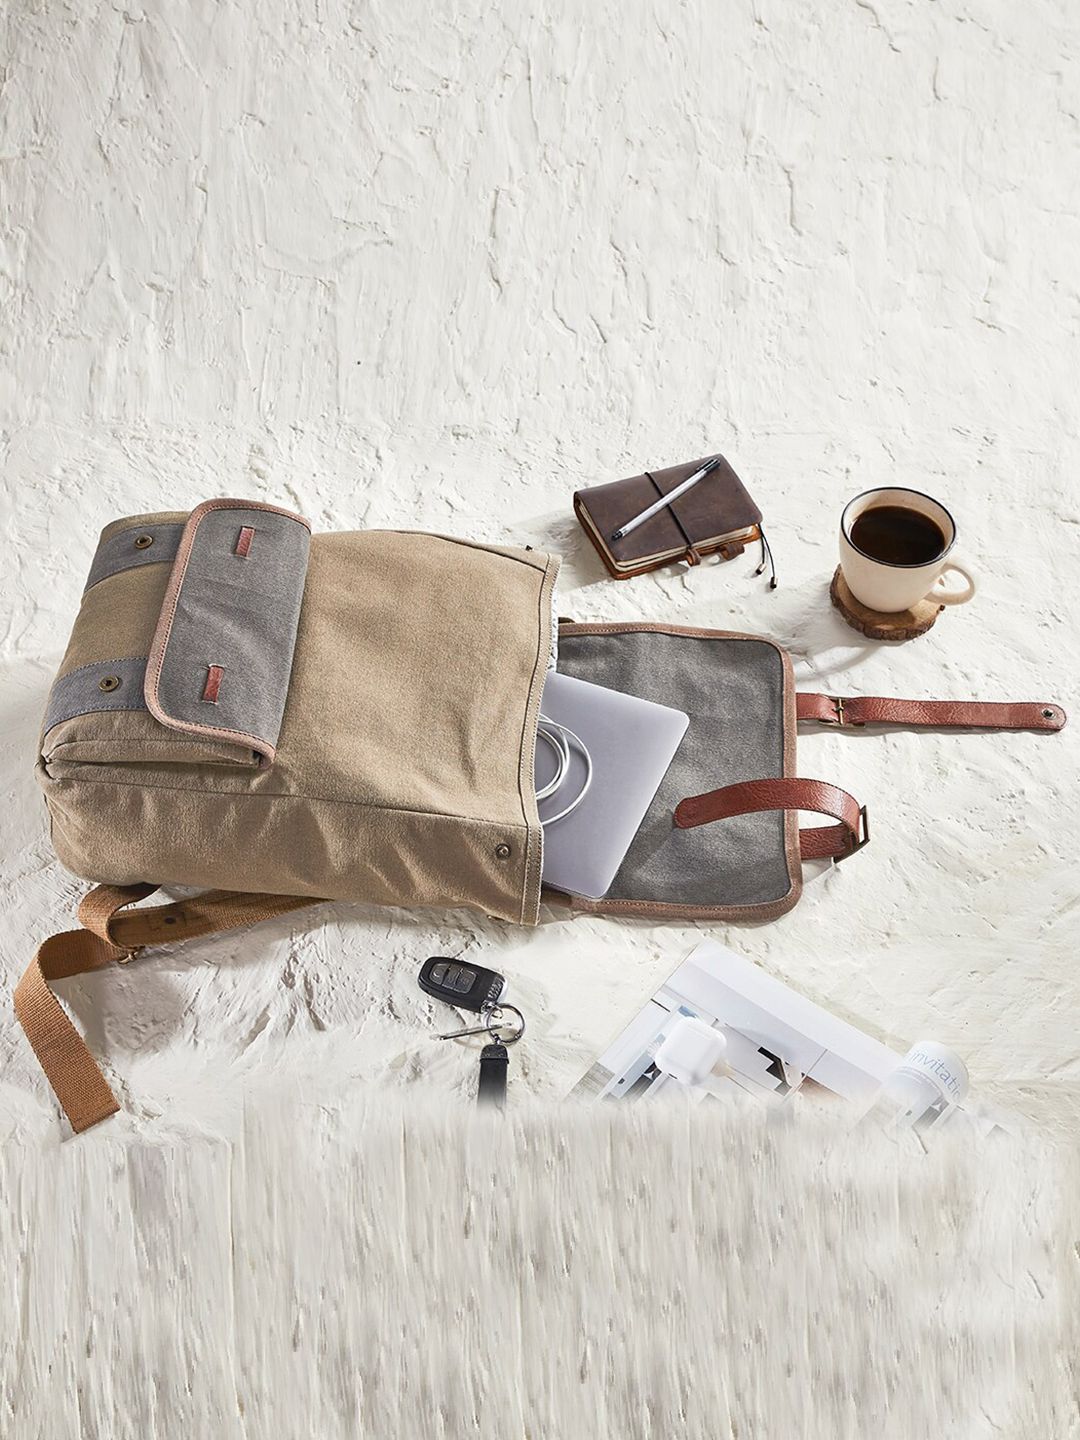 Mona B Unisex Brown & Grey Backpack with Laptop Sleeve Price in India